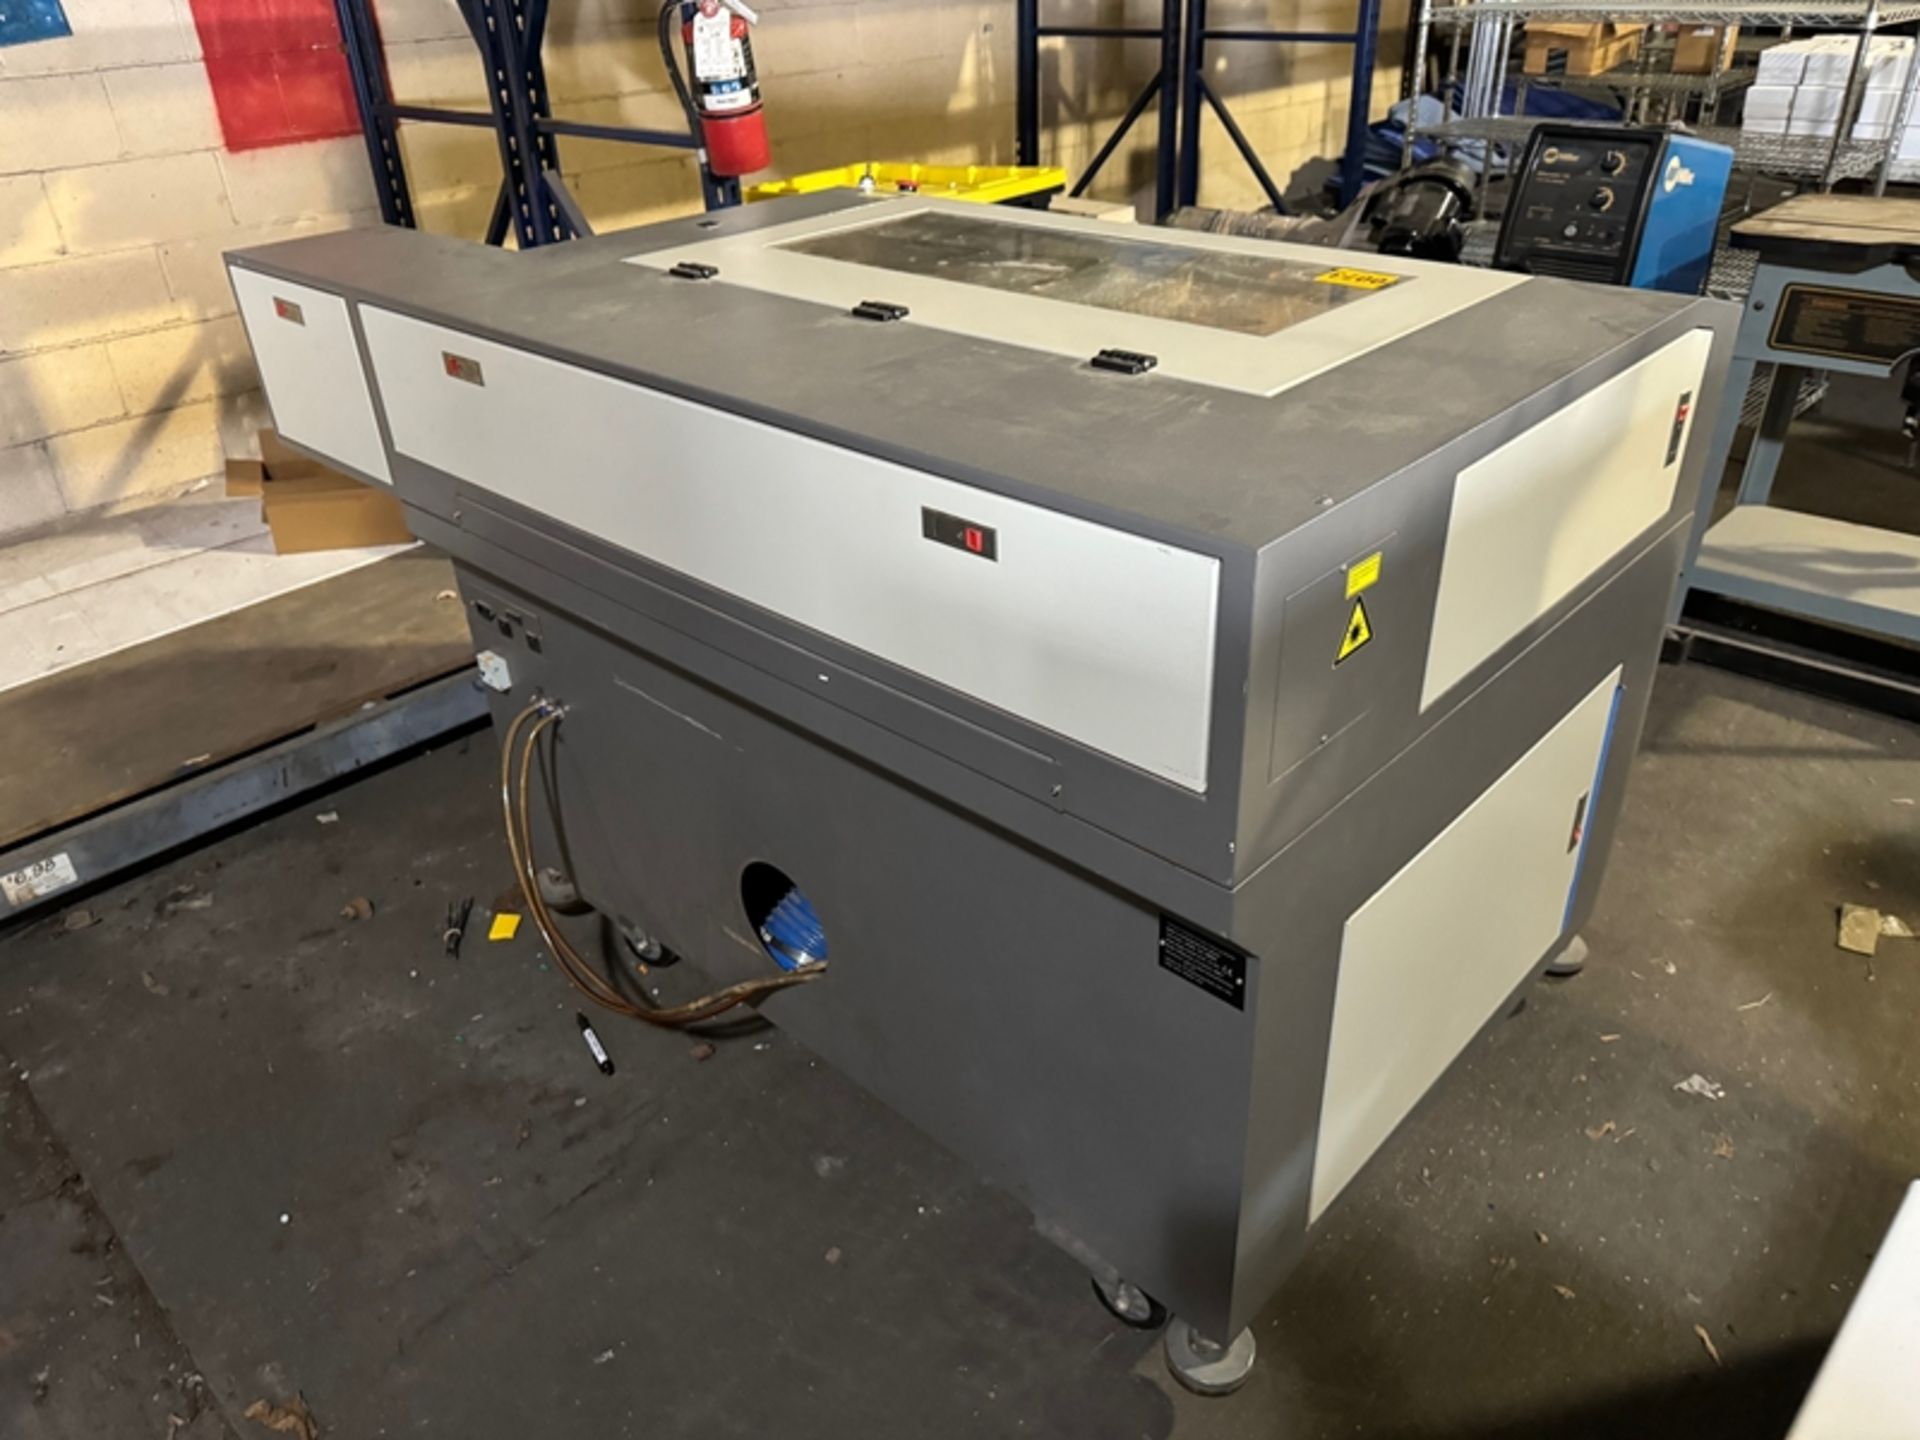 2008 JINAN Model LC6090 laser engraving machine approximately 36" X 24" cutting surface area with - Image 2 of 6